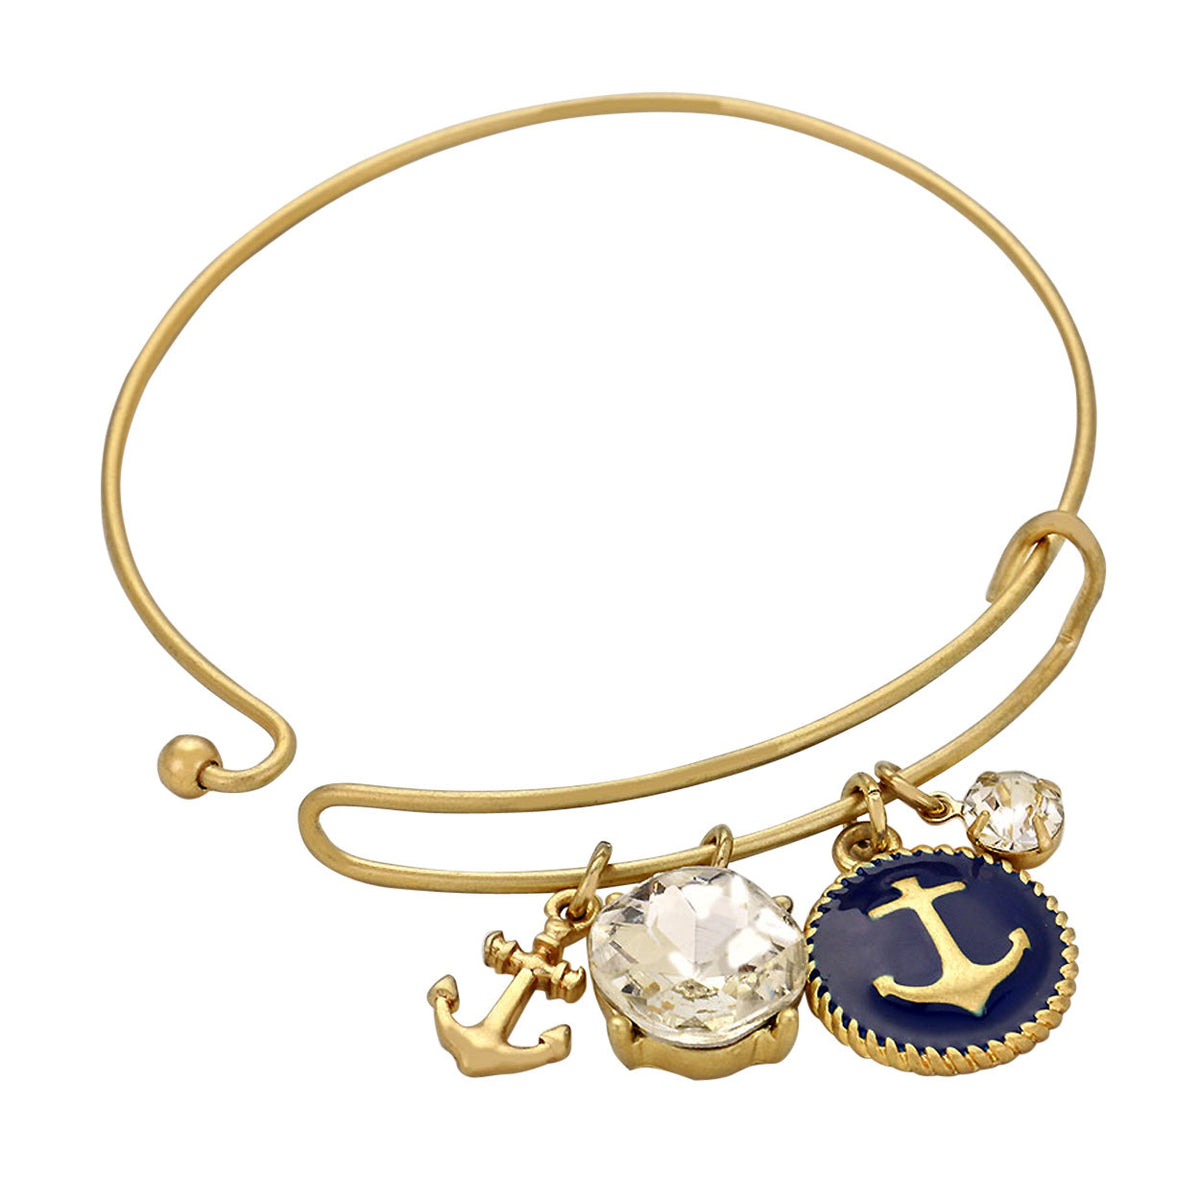 Beating Wintertime Blues and Thinking about Nautical Fun!